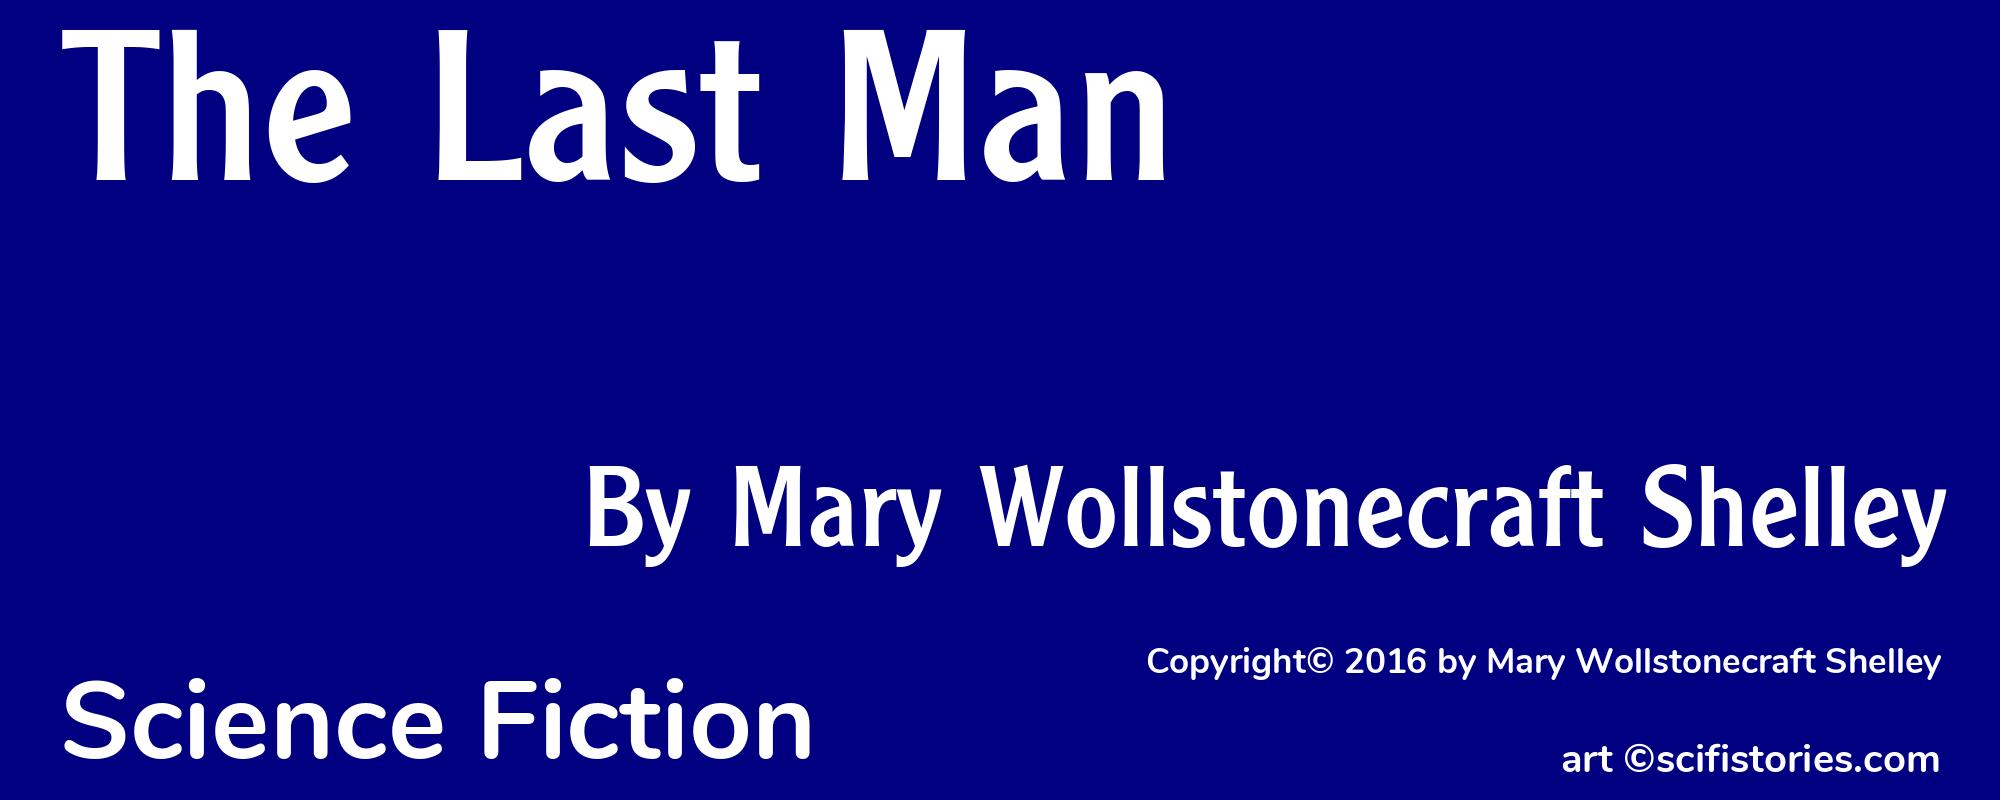 The Last Man - Cover